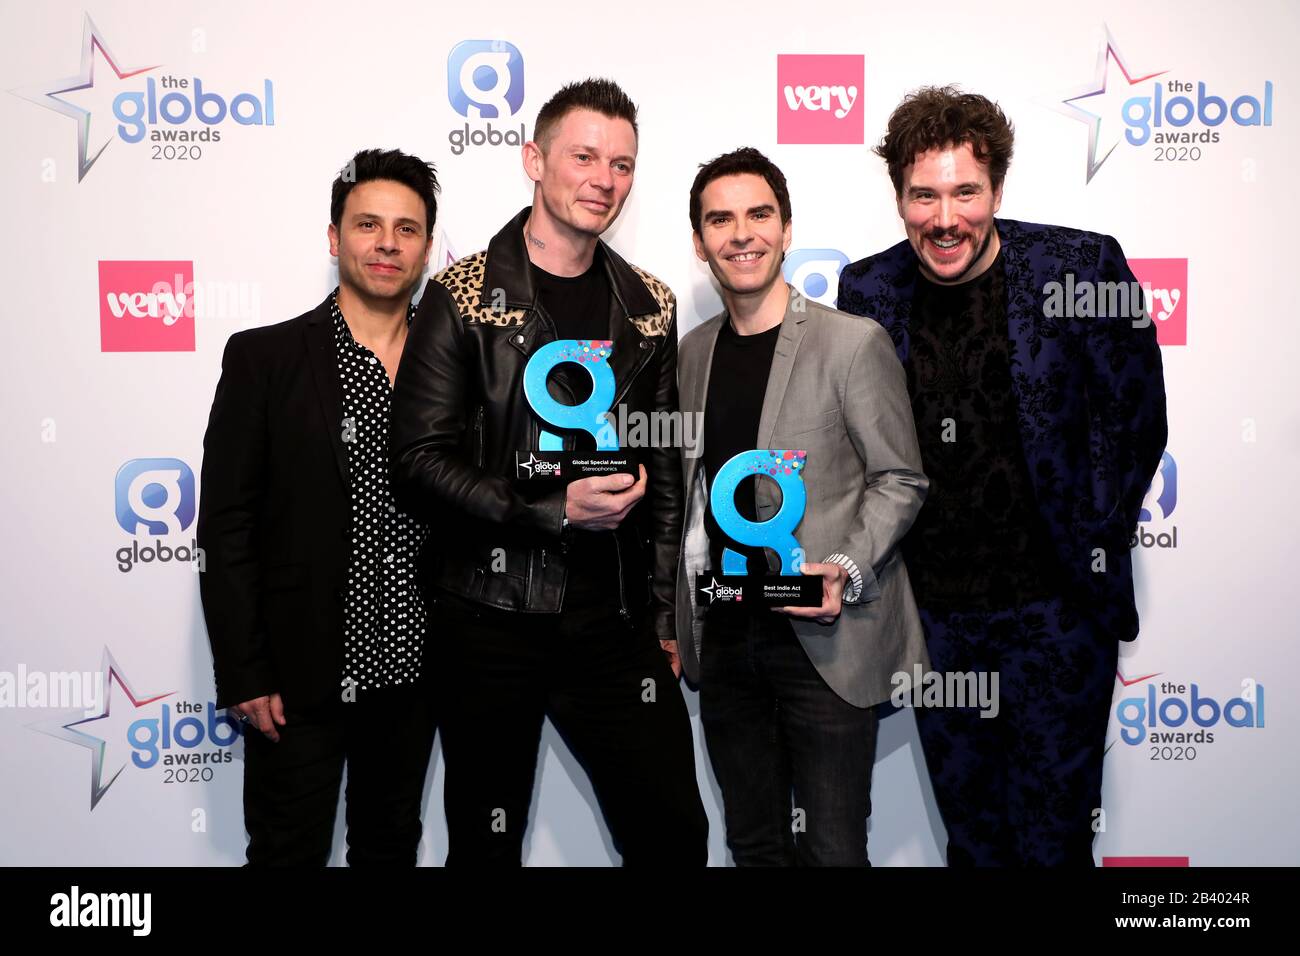 Adam Zindani, Richard Jones, Kelly Jones and Jamie Morrison of the Stereophonics winners of the Best Indie Act and Global Special Award at The Global Awards 2020 with Very.co.uk at London's Eventim Apollo Hammersmith. Stock Photo